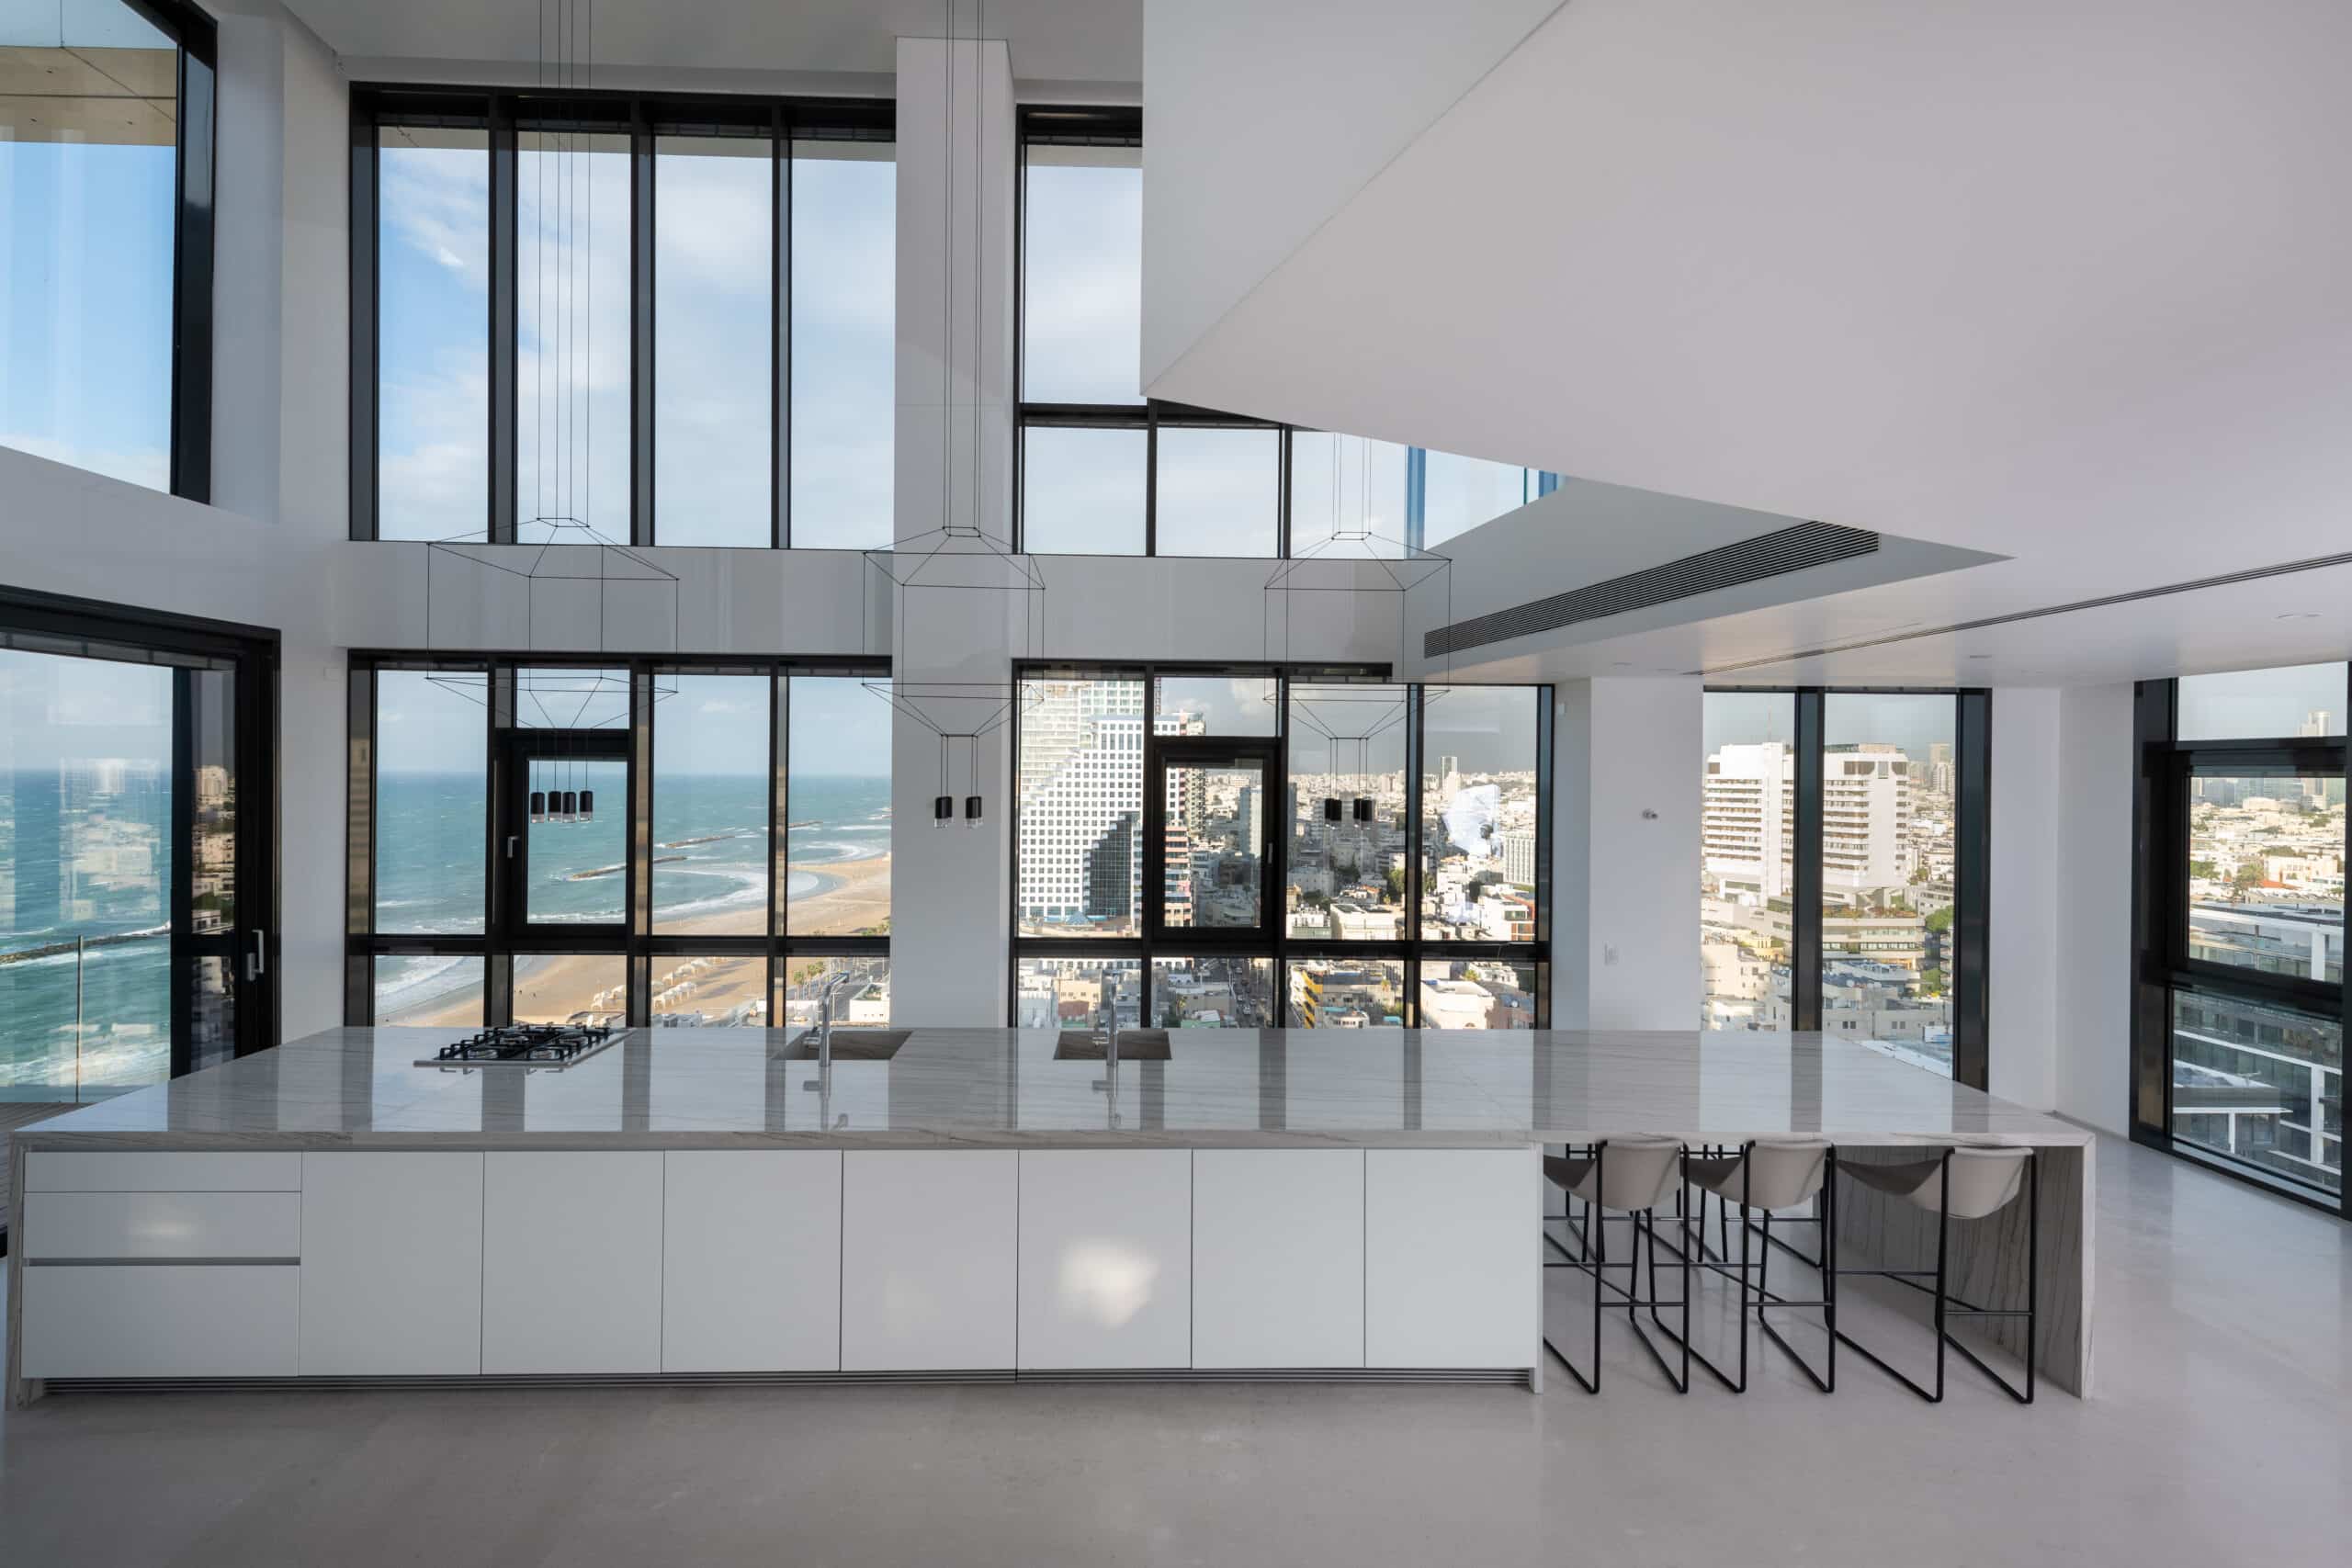 29 HaYarkon Street, Tel Aviv 520 square metre (5,382 sift) duplex penthouse with over 270 square meters (2,906 sift) of balconies. Private rooftop with infinity pool and views over the Mediterranean. Priced at £21.7m